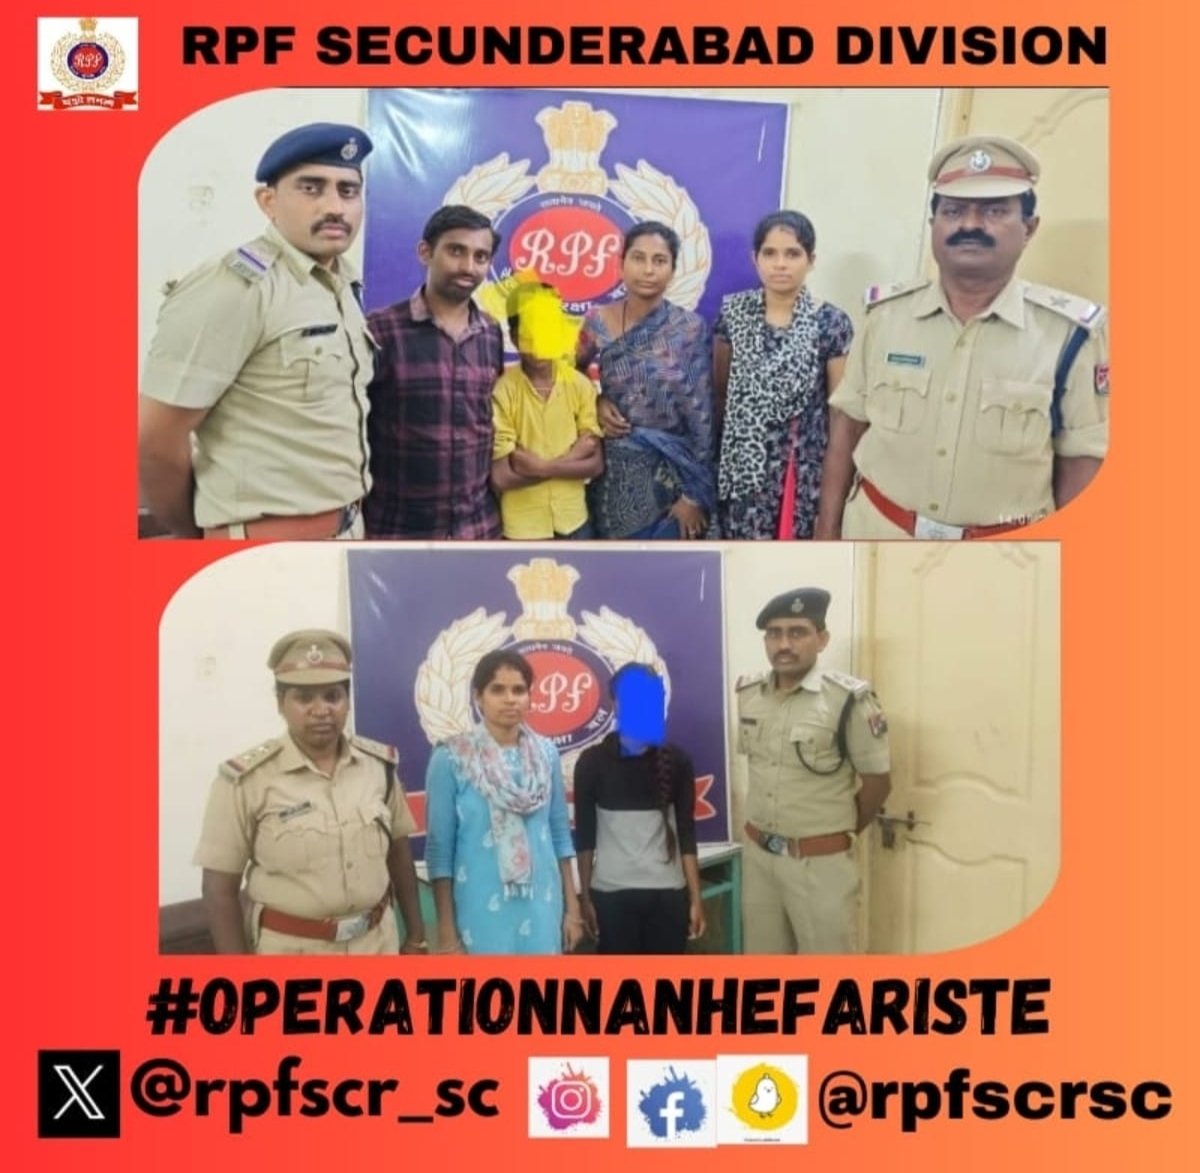 The rescue of 🧑‍💼👨‍🎤  one boy aged 12 and one girl 17 years by RPF/SC division with child line Team under #OPERATIONNANHEFARISTE is commendable. They were handed over to the Child Helpline team for necessary care and protection, emphasizing RPF's commitment to child welfare.👨‍👩‍👦